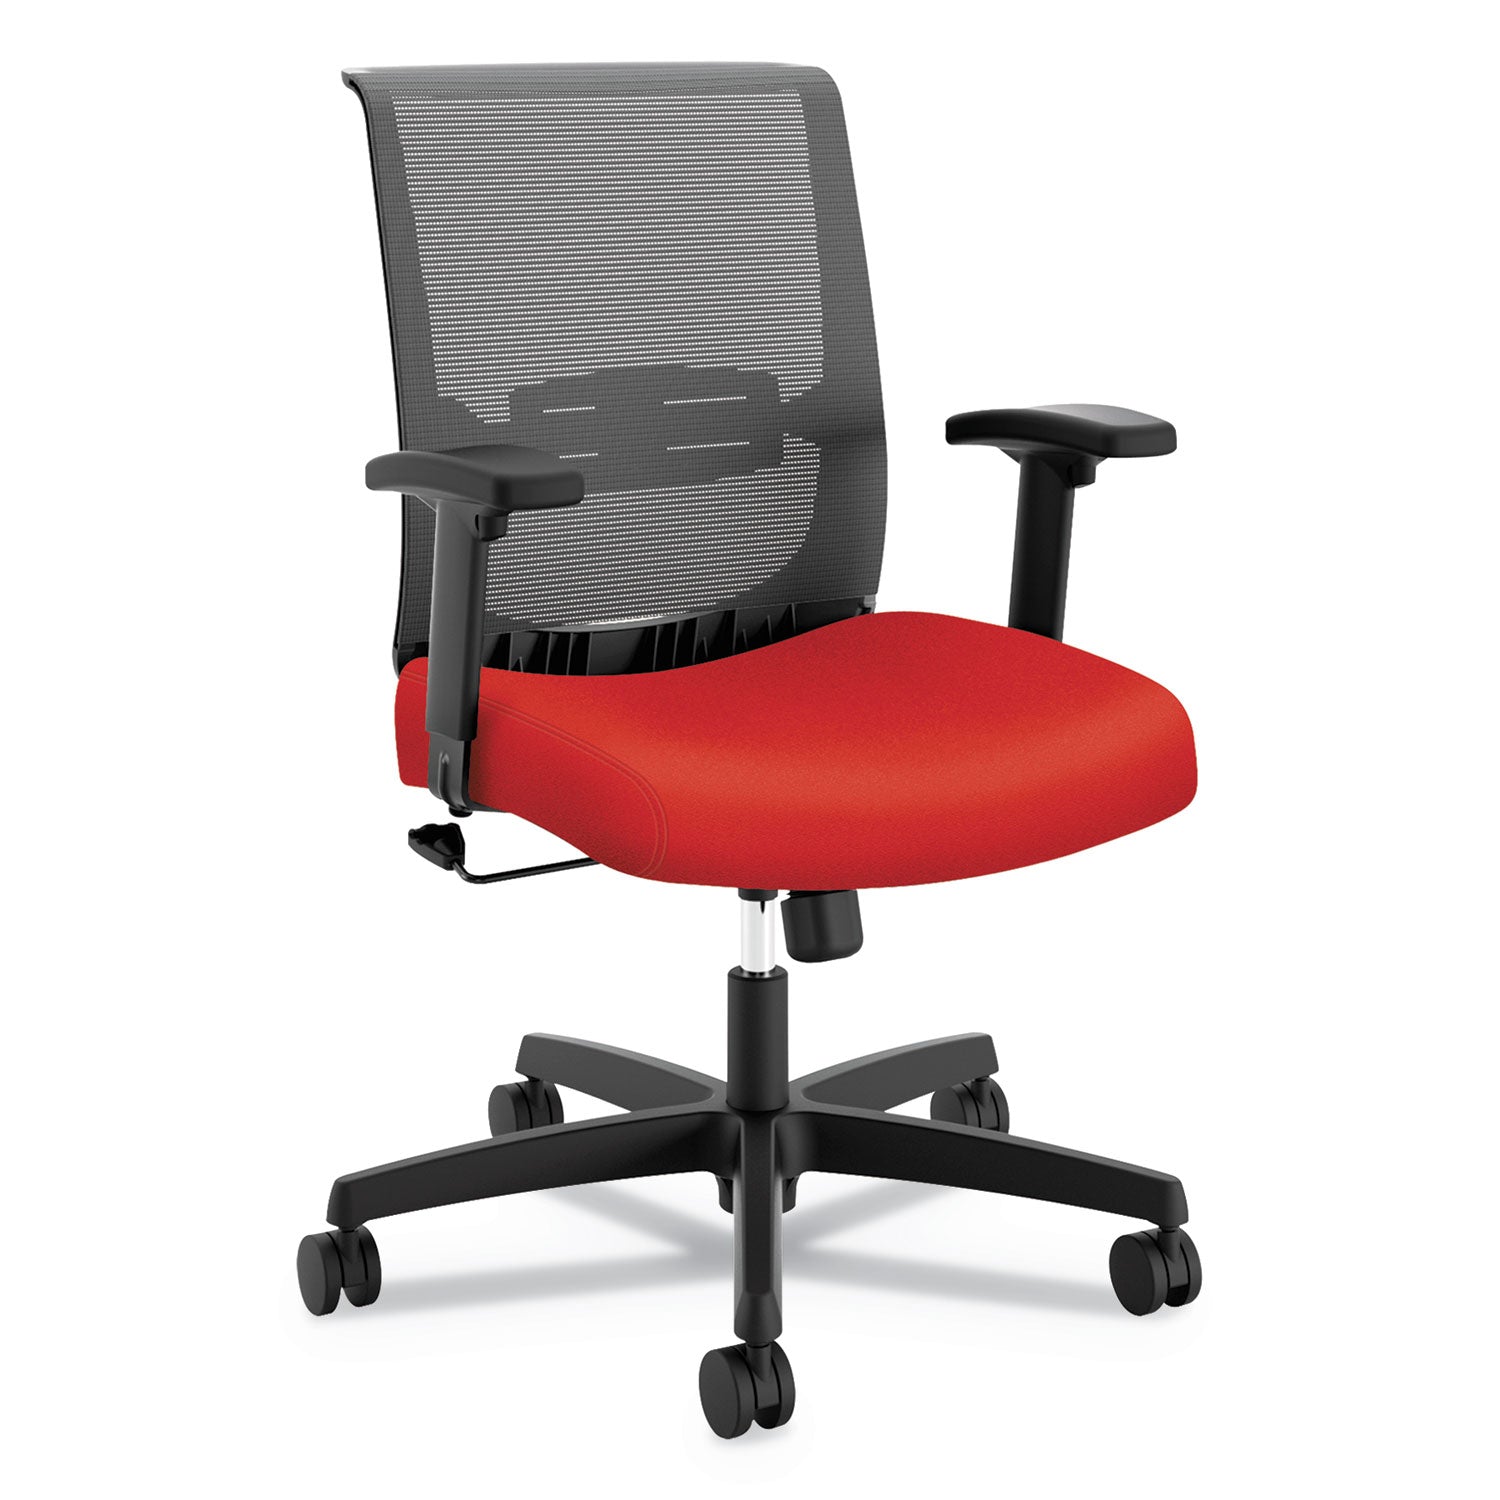 convergence-mid-back-task-chair-swivel-tilt-supports-up-to-275-lb-165-to-21-seat-height-red-seat-black-back-base_honcmz1acu67 - 1